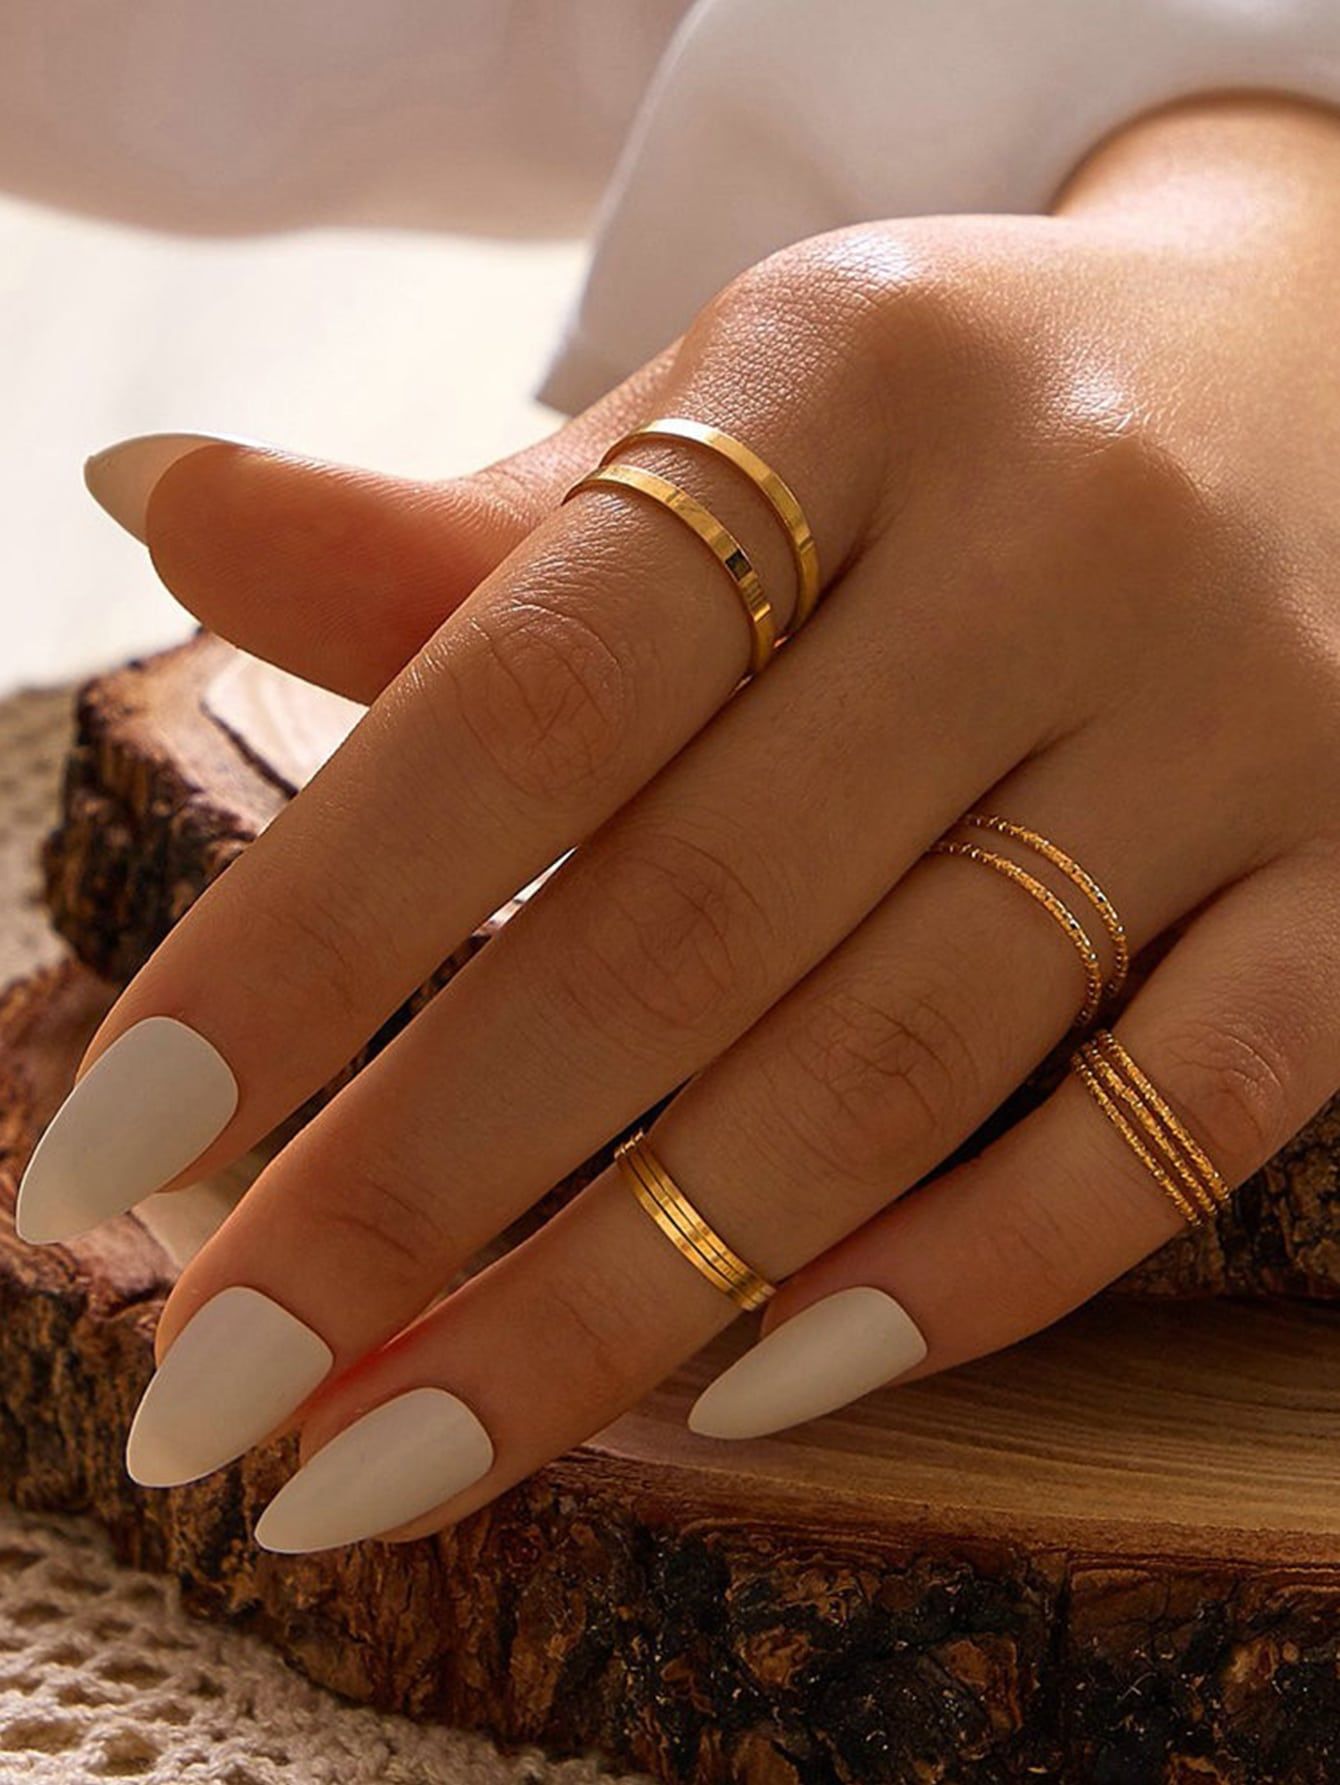 Chic and Simple: Minimalistic Jewelry
Ideas